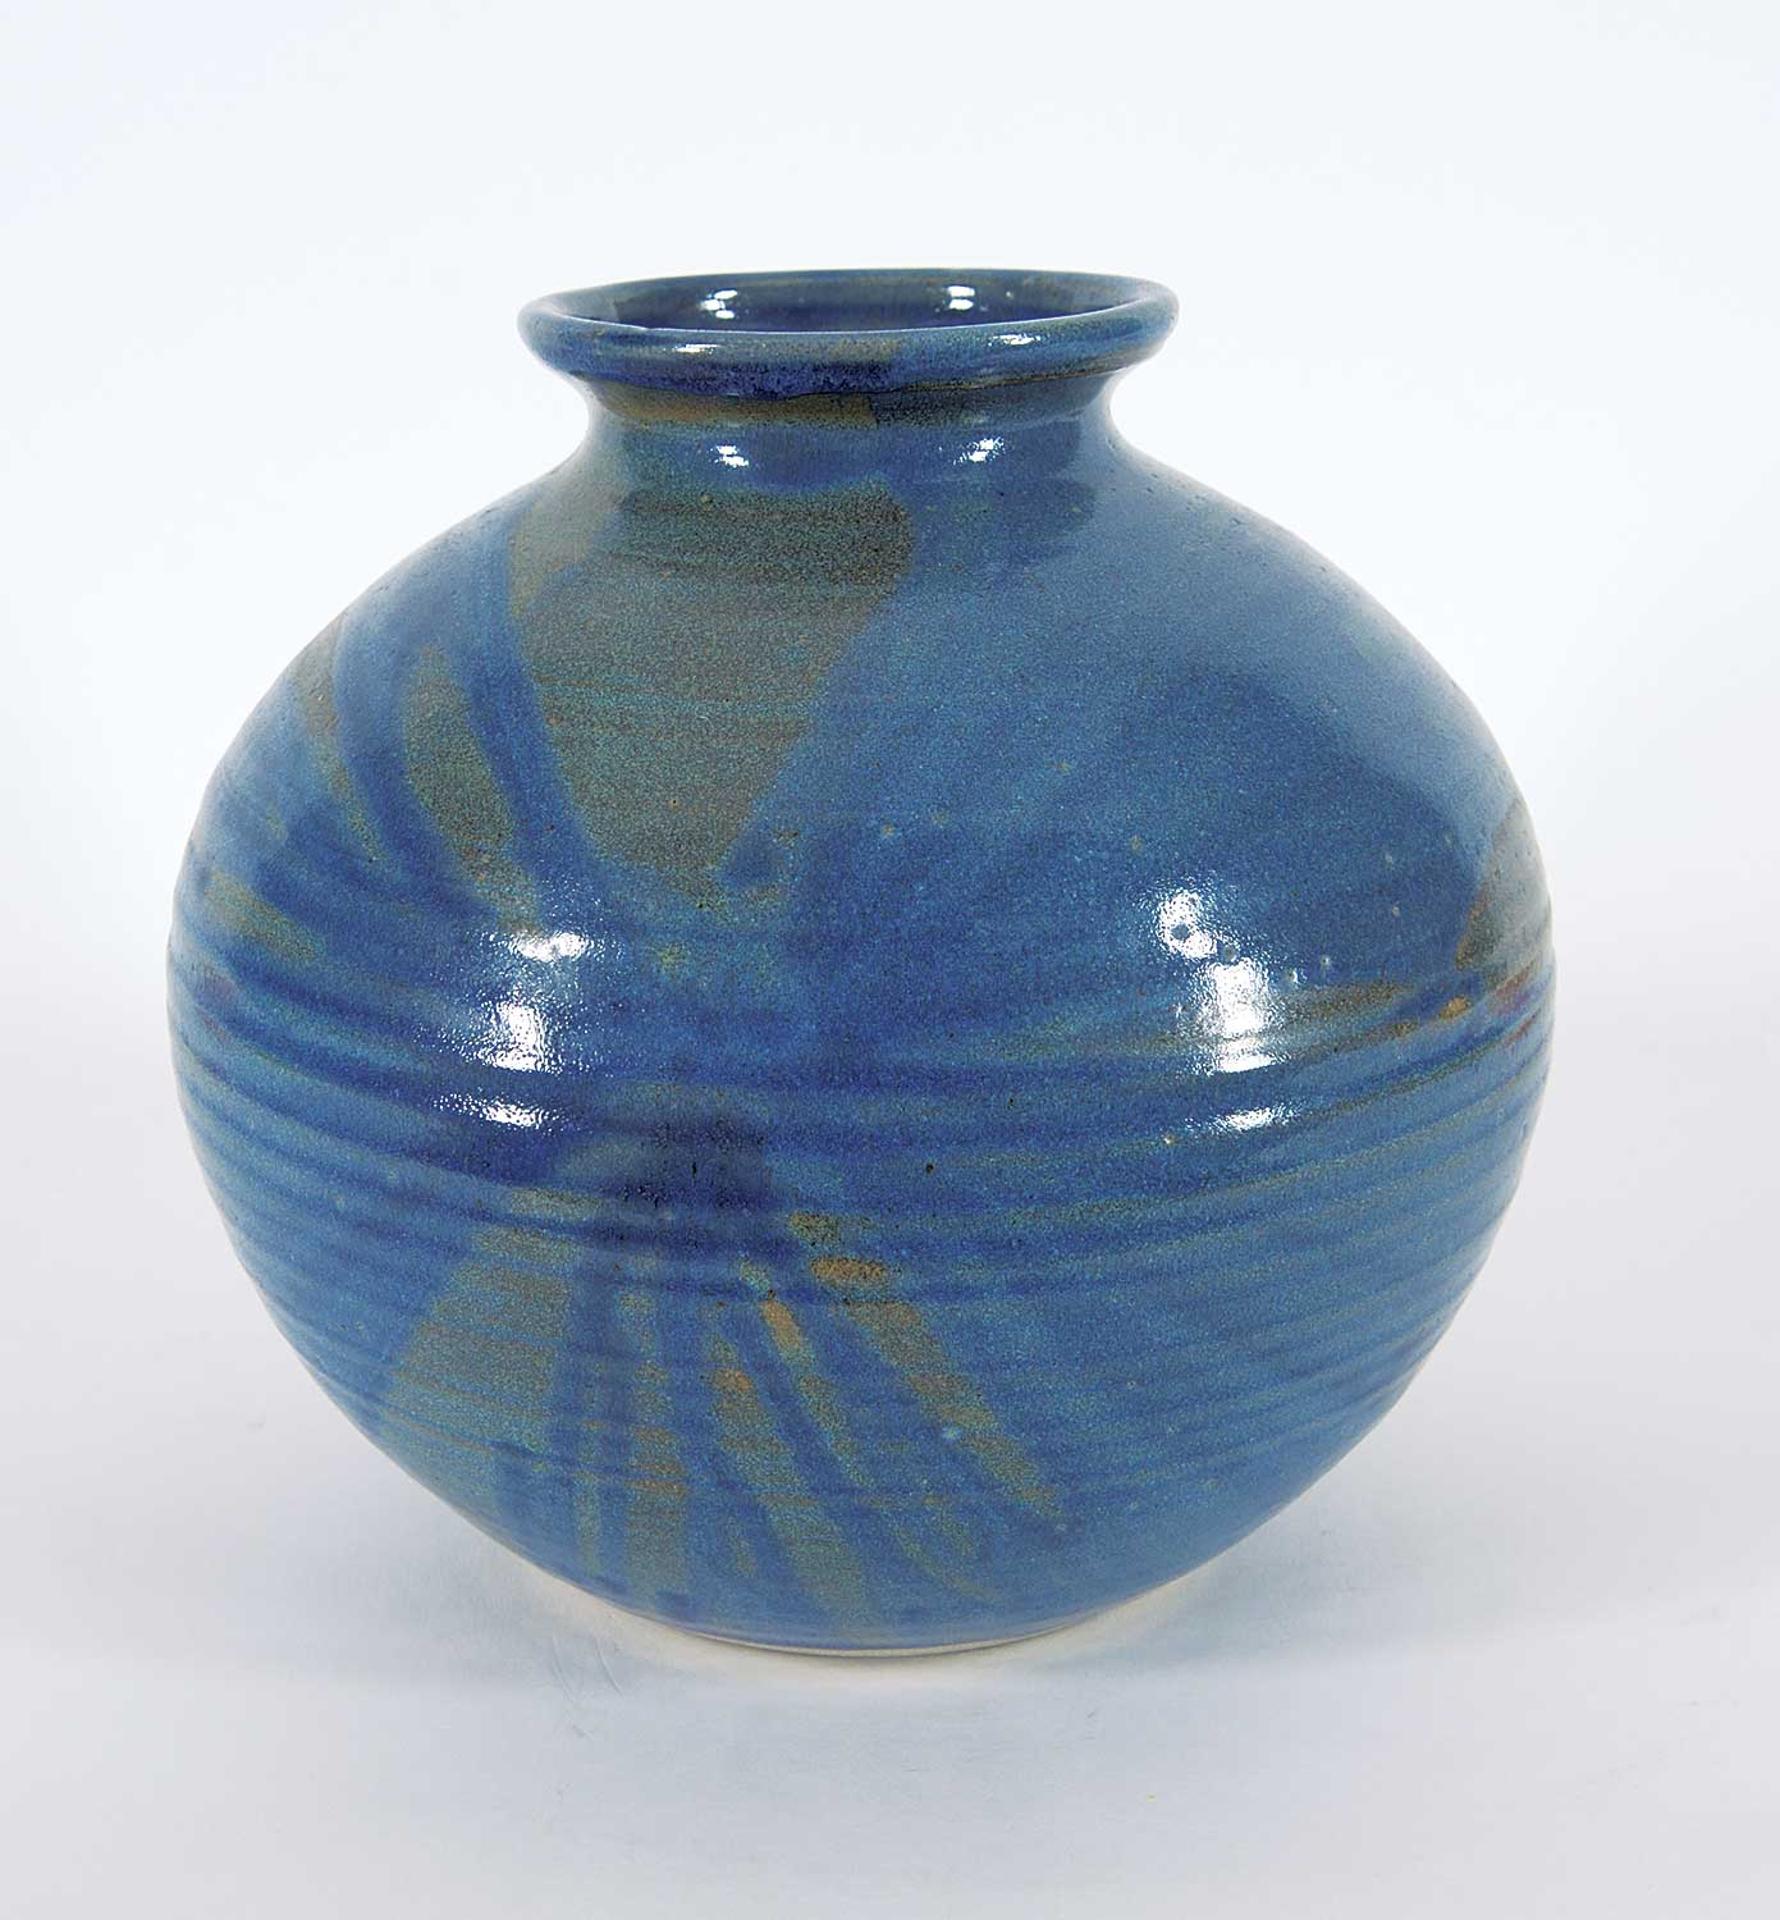 Franco Lo Pinto - Untitled - Blue and Green Stroke Pot